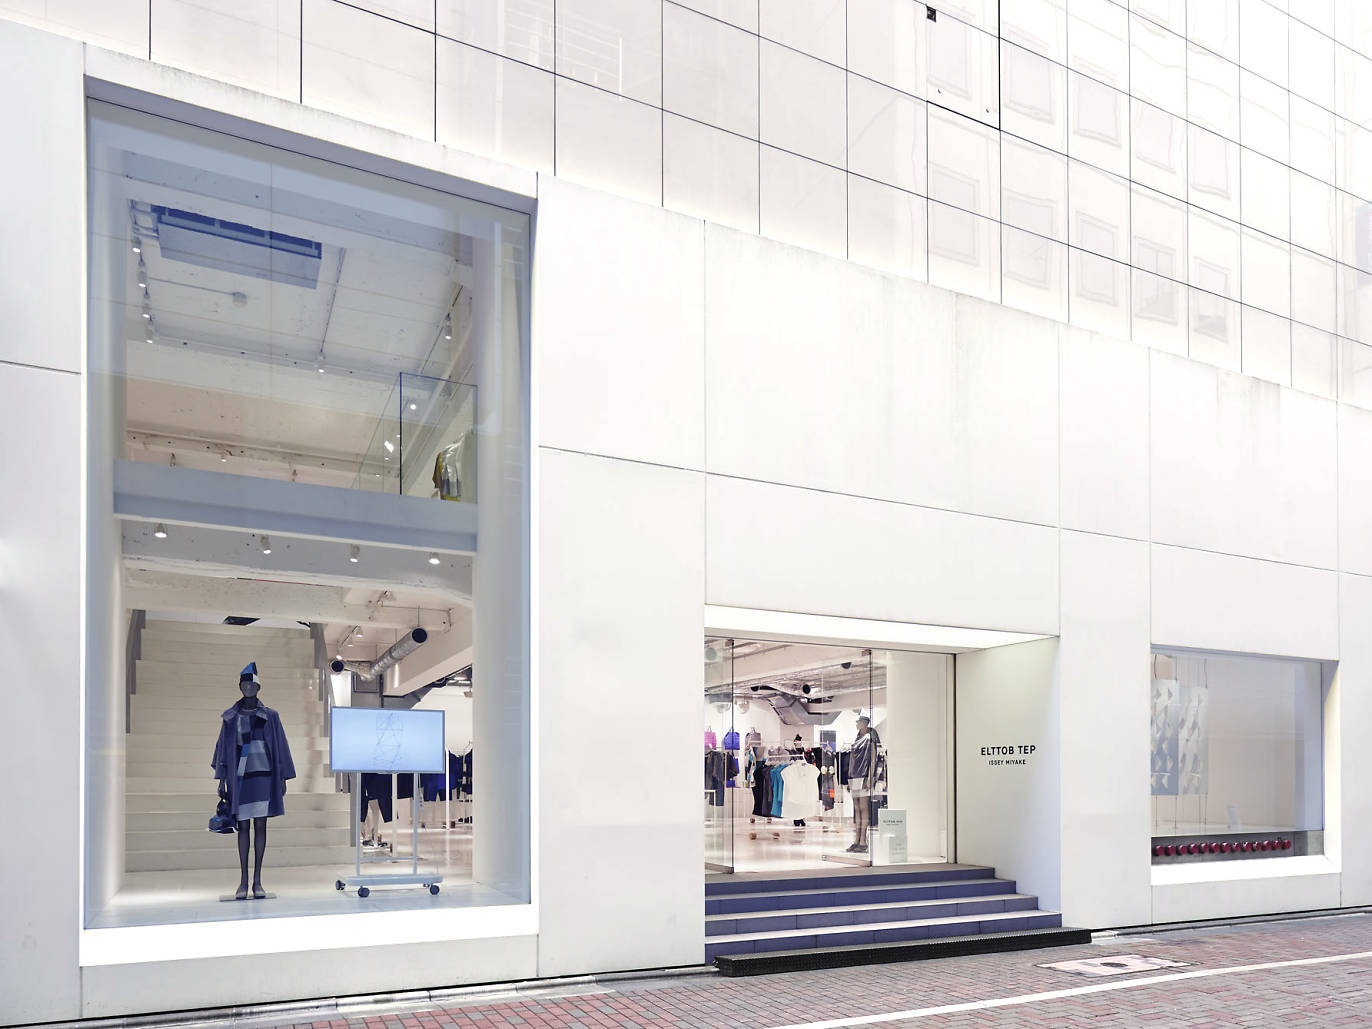 50 best shops in Ginza | Time Out Tokyo